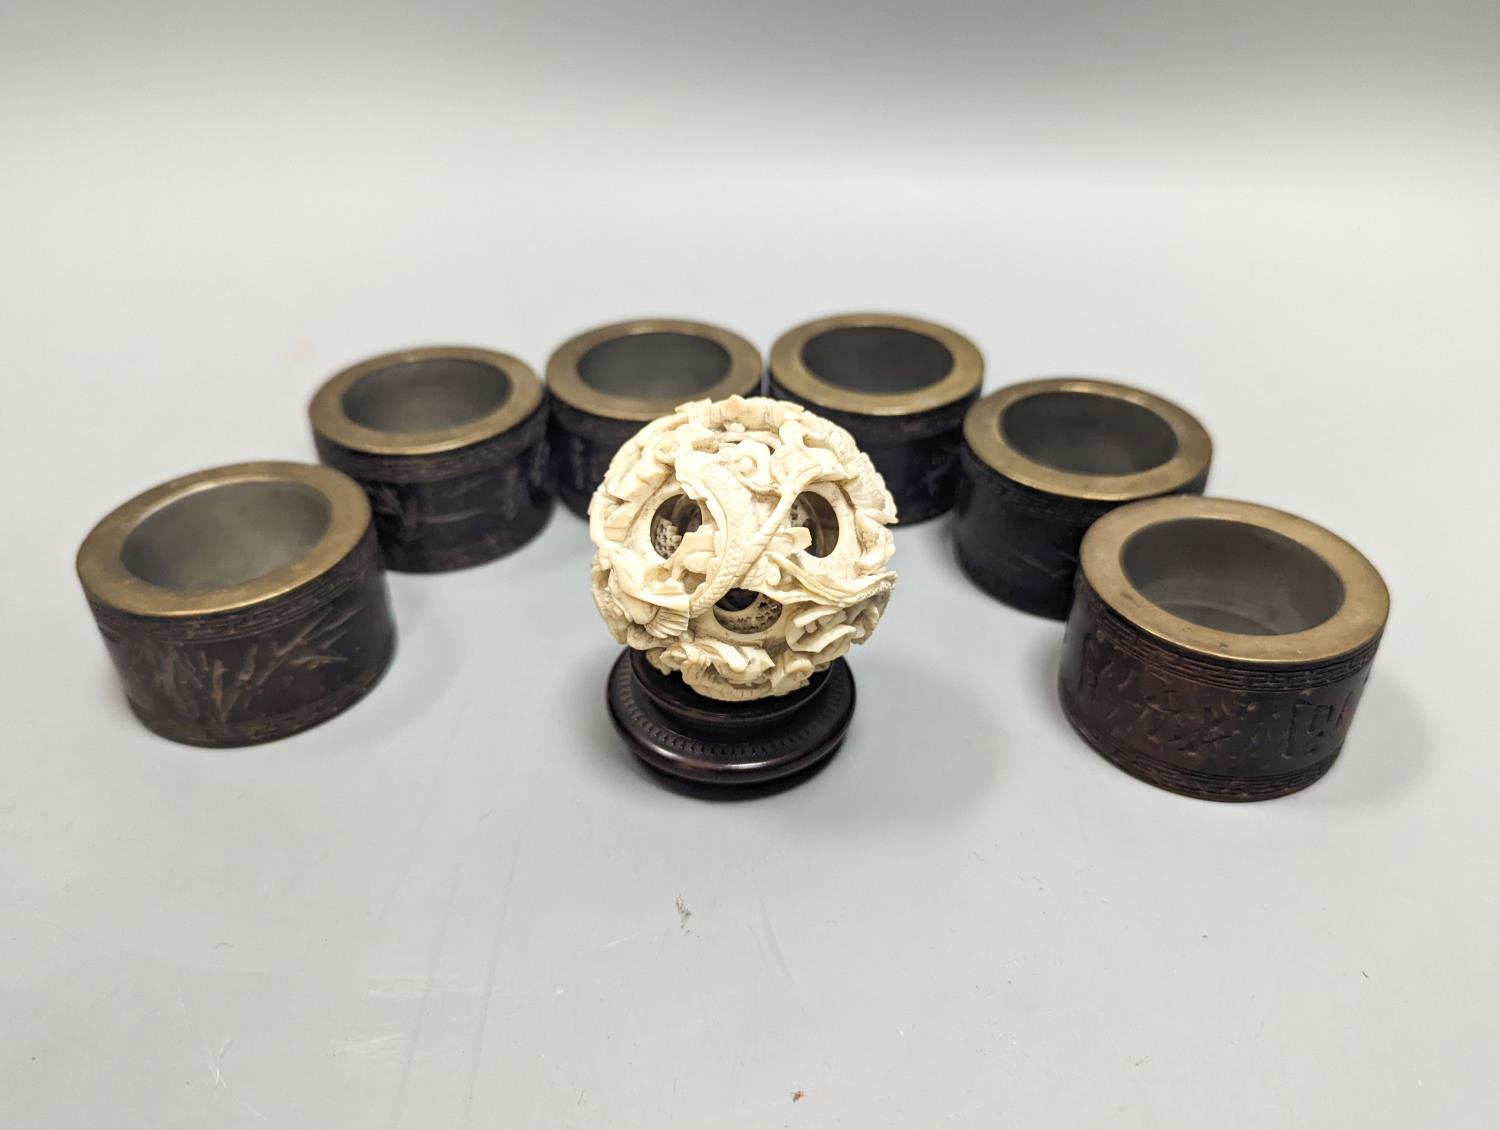 A Chinese ivory concentric puzzle ball, 6 Chinese coconut and brass mounted napkin rings.